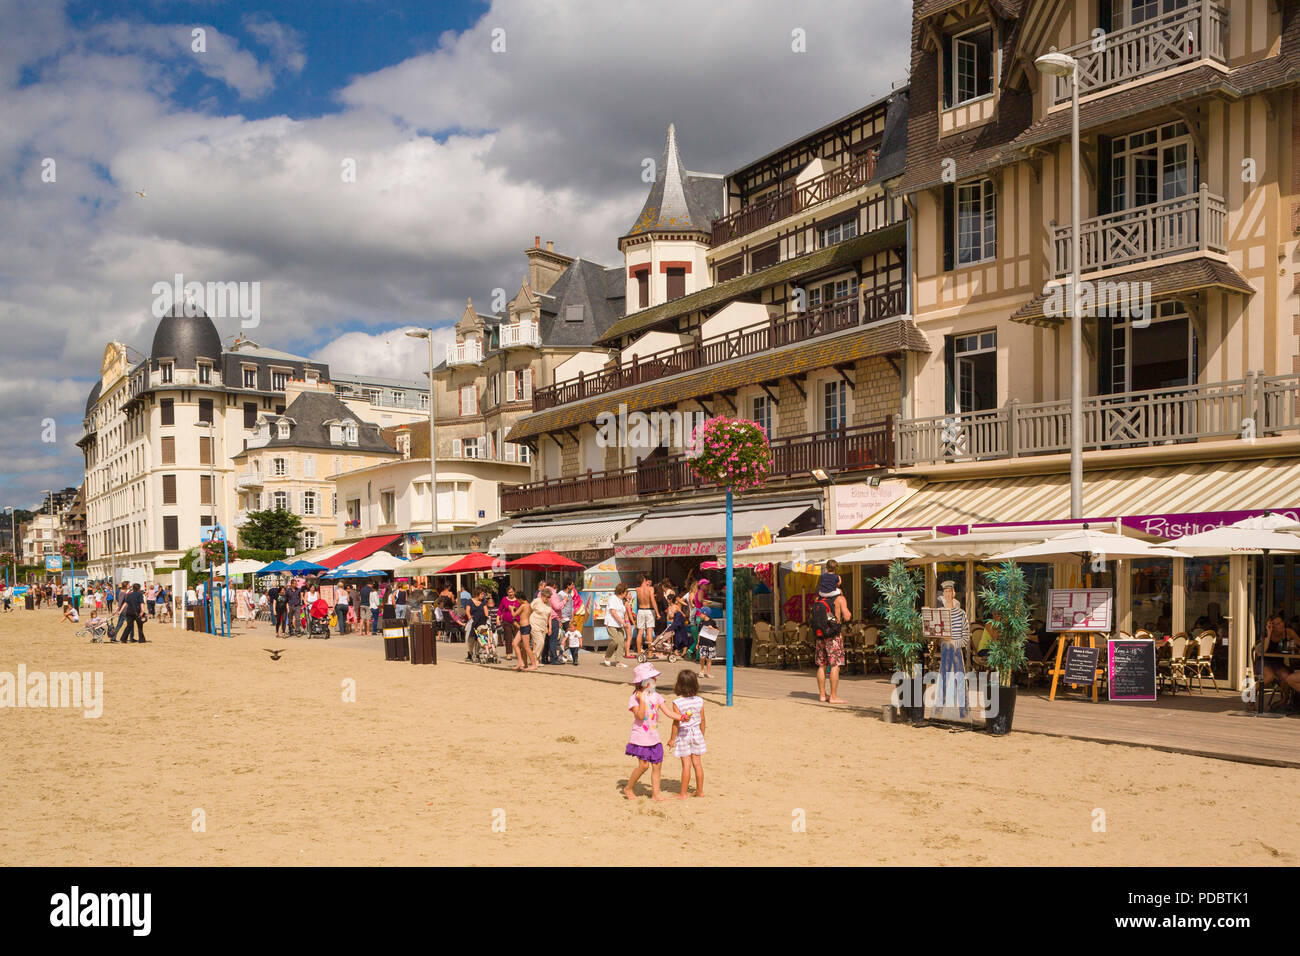 Holidaymakers on the seafront by the sandy beach and boardwalk at Trouville-sur-Mer, Normandy, France Stock Photo